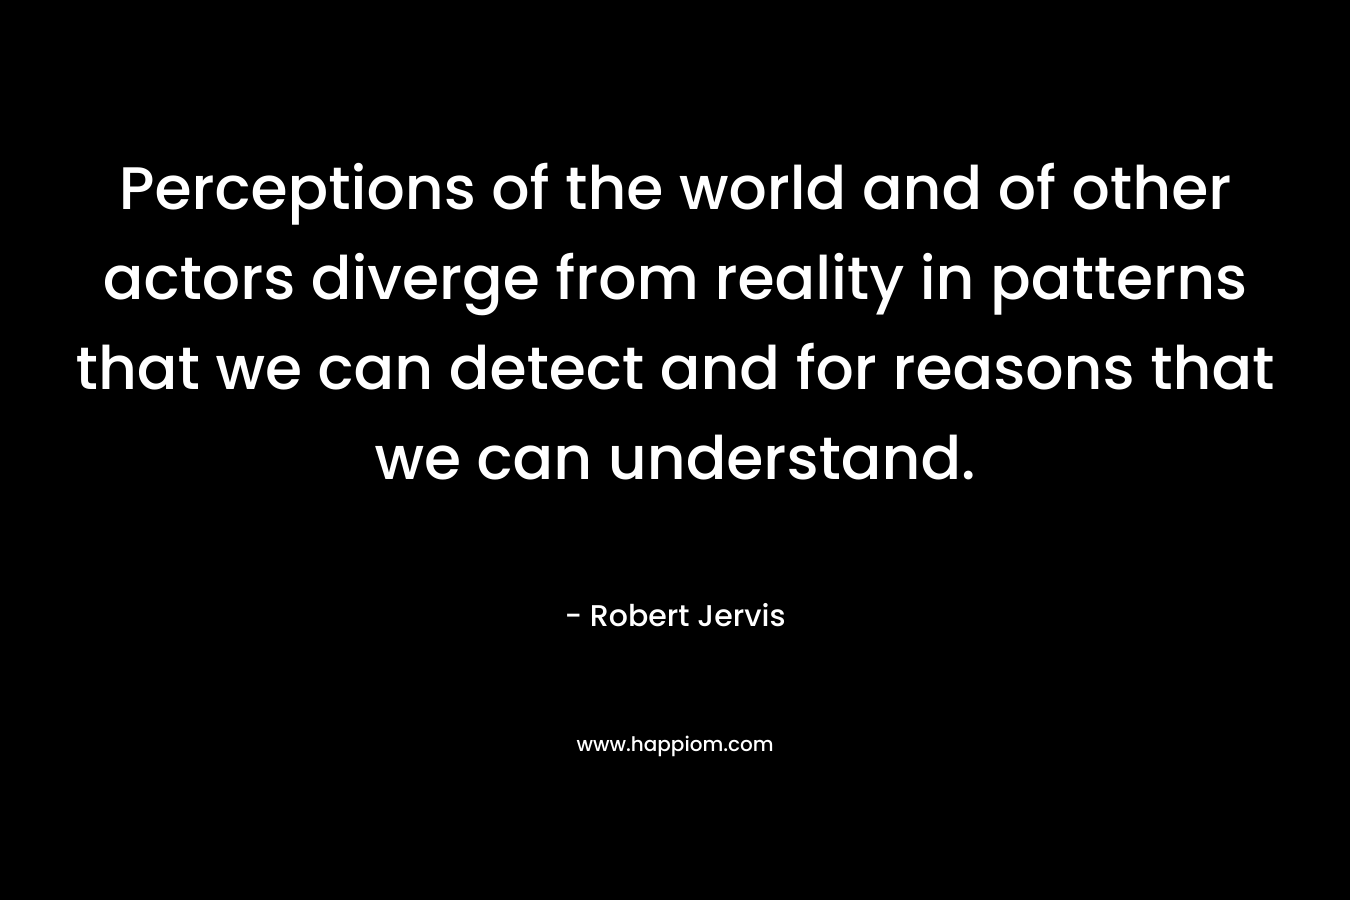 Perceptions of the world and of other actors diverge from reality in patterns that we can detect and for reasons that we can understand. – Robert Jervis